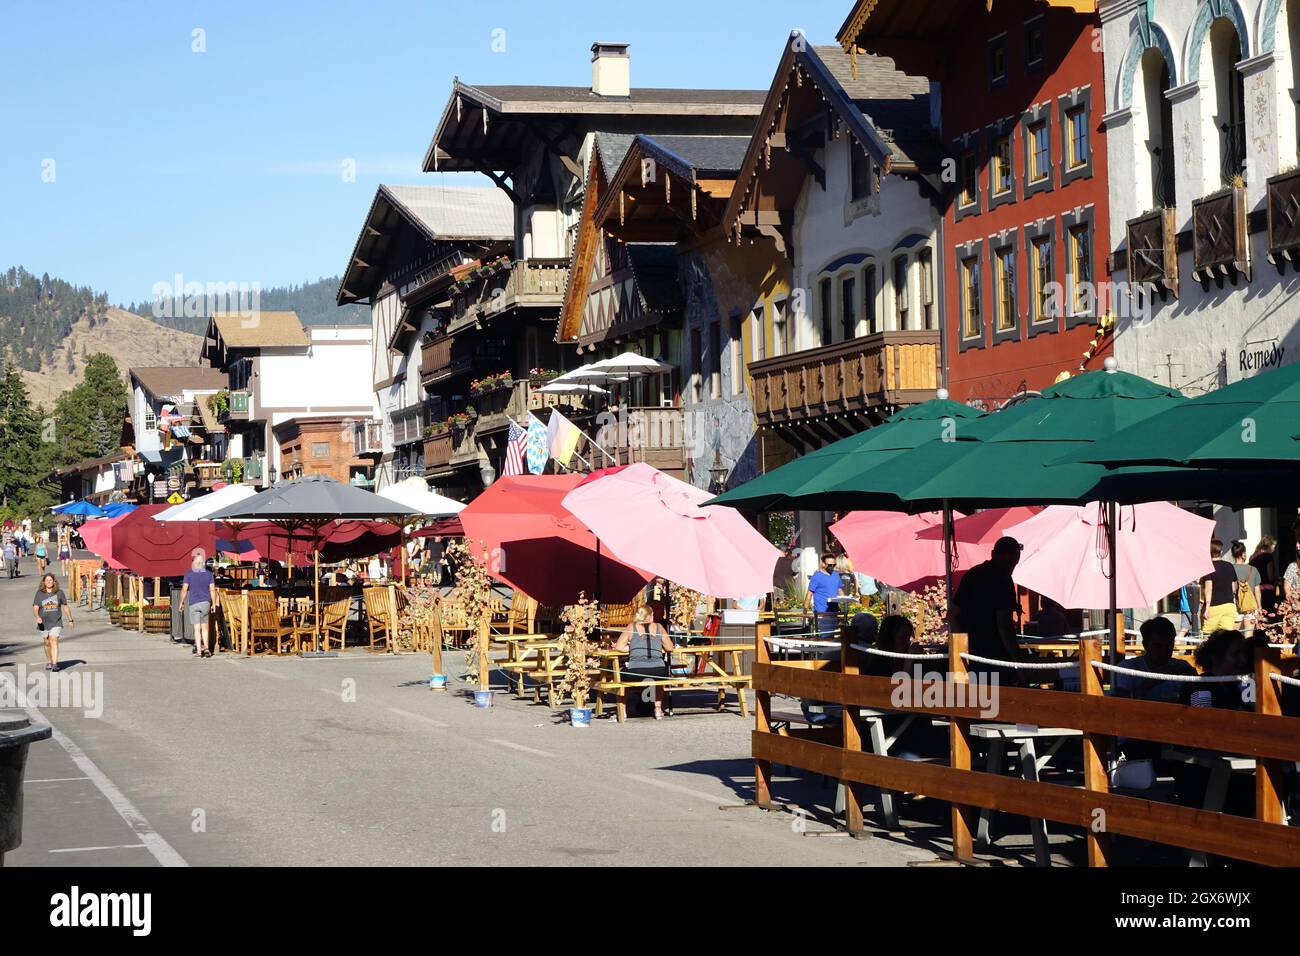 Leavenworth is a Bavarian-styled village in the Cascade Mountains, in central Washington State. Alpine-style buildings with restaurants serving German Stock Photo